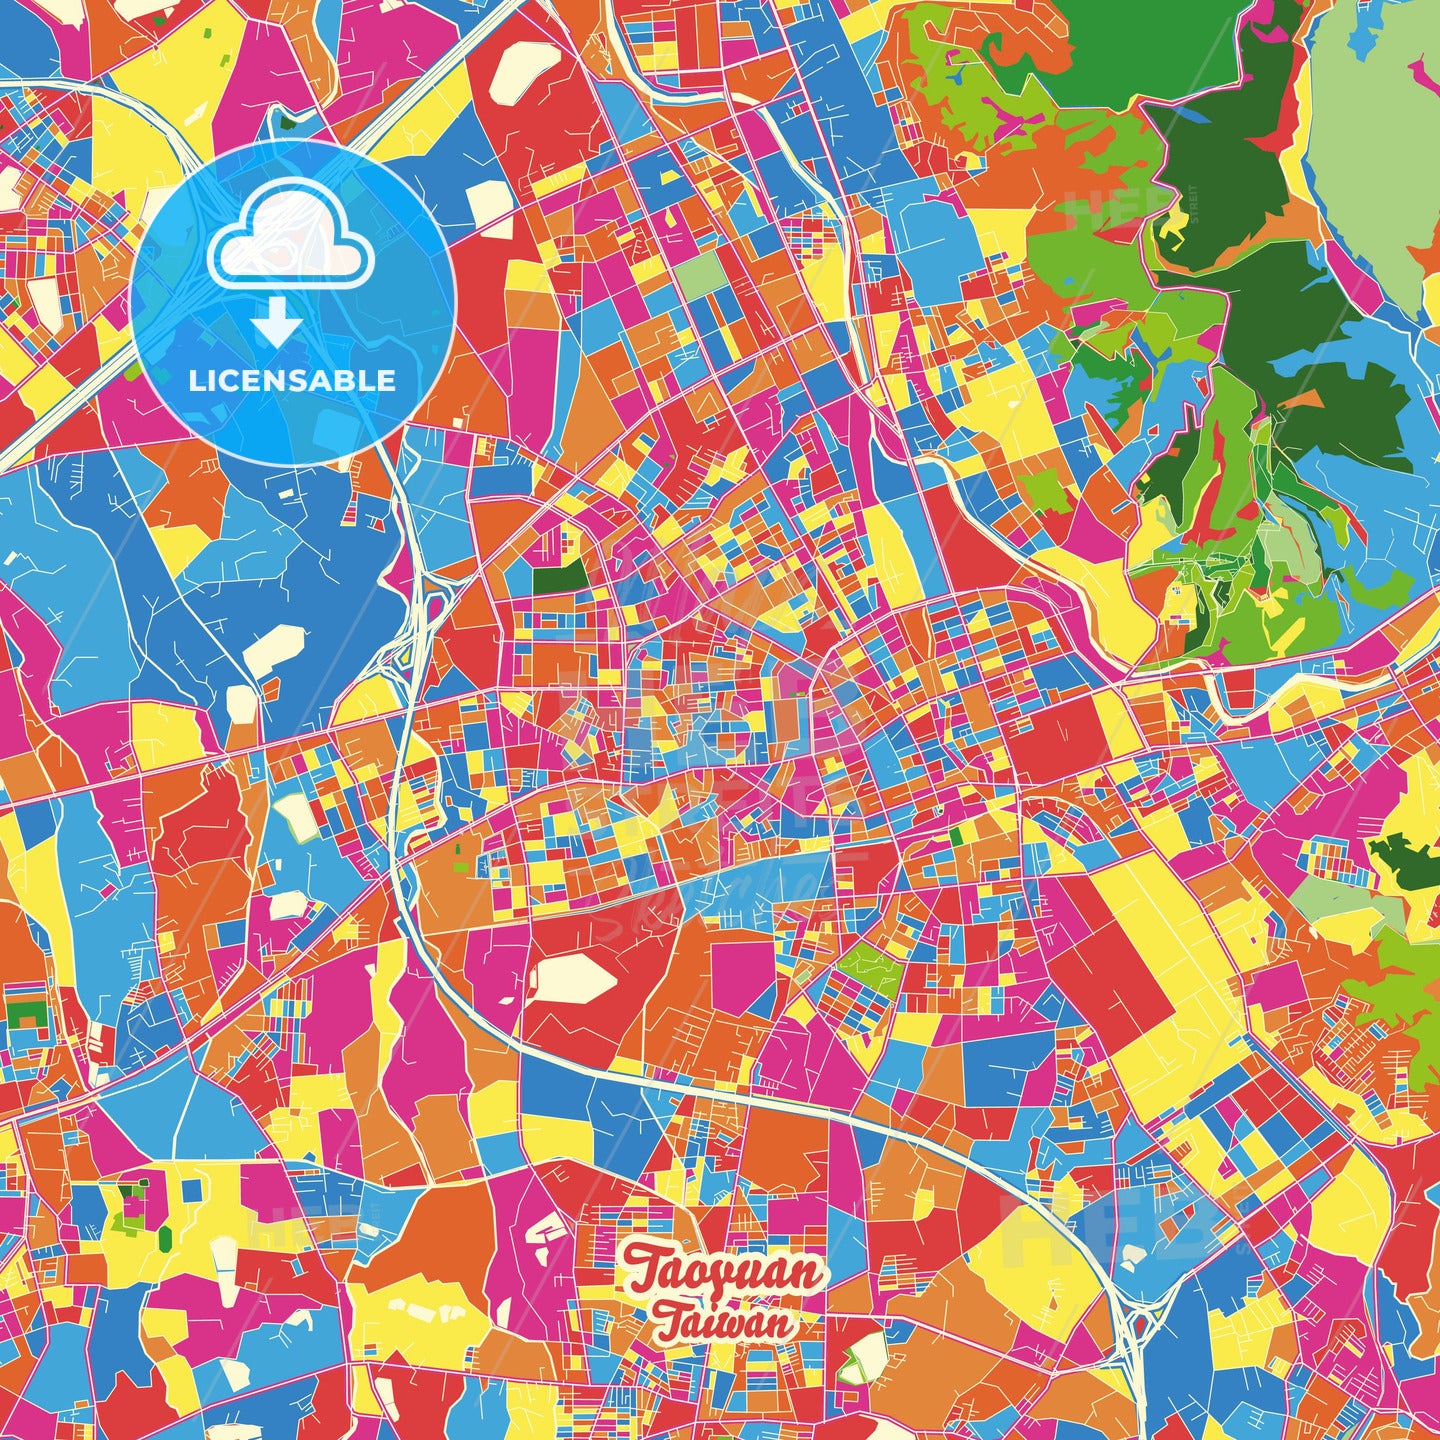 Taoyuan, Taiwan Crazy Colorful Street Map Poster Template - HEBSTREITS Sketches